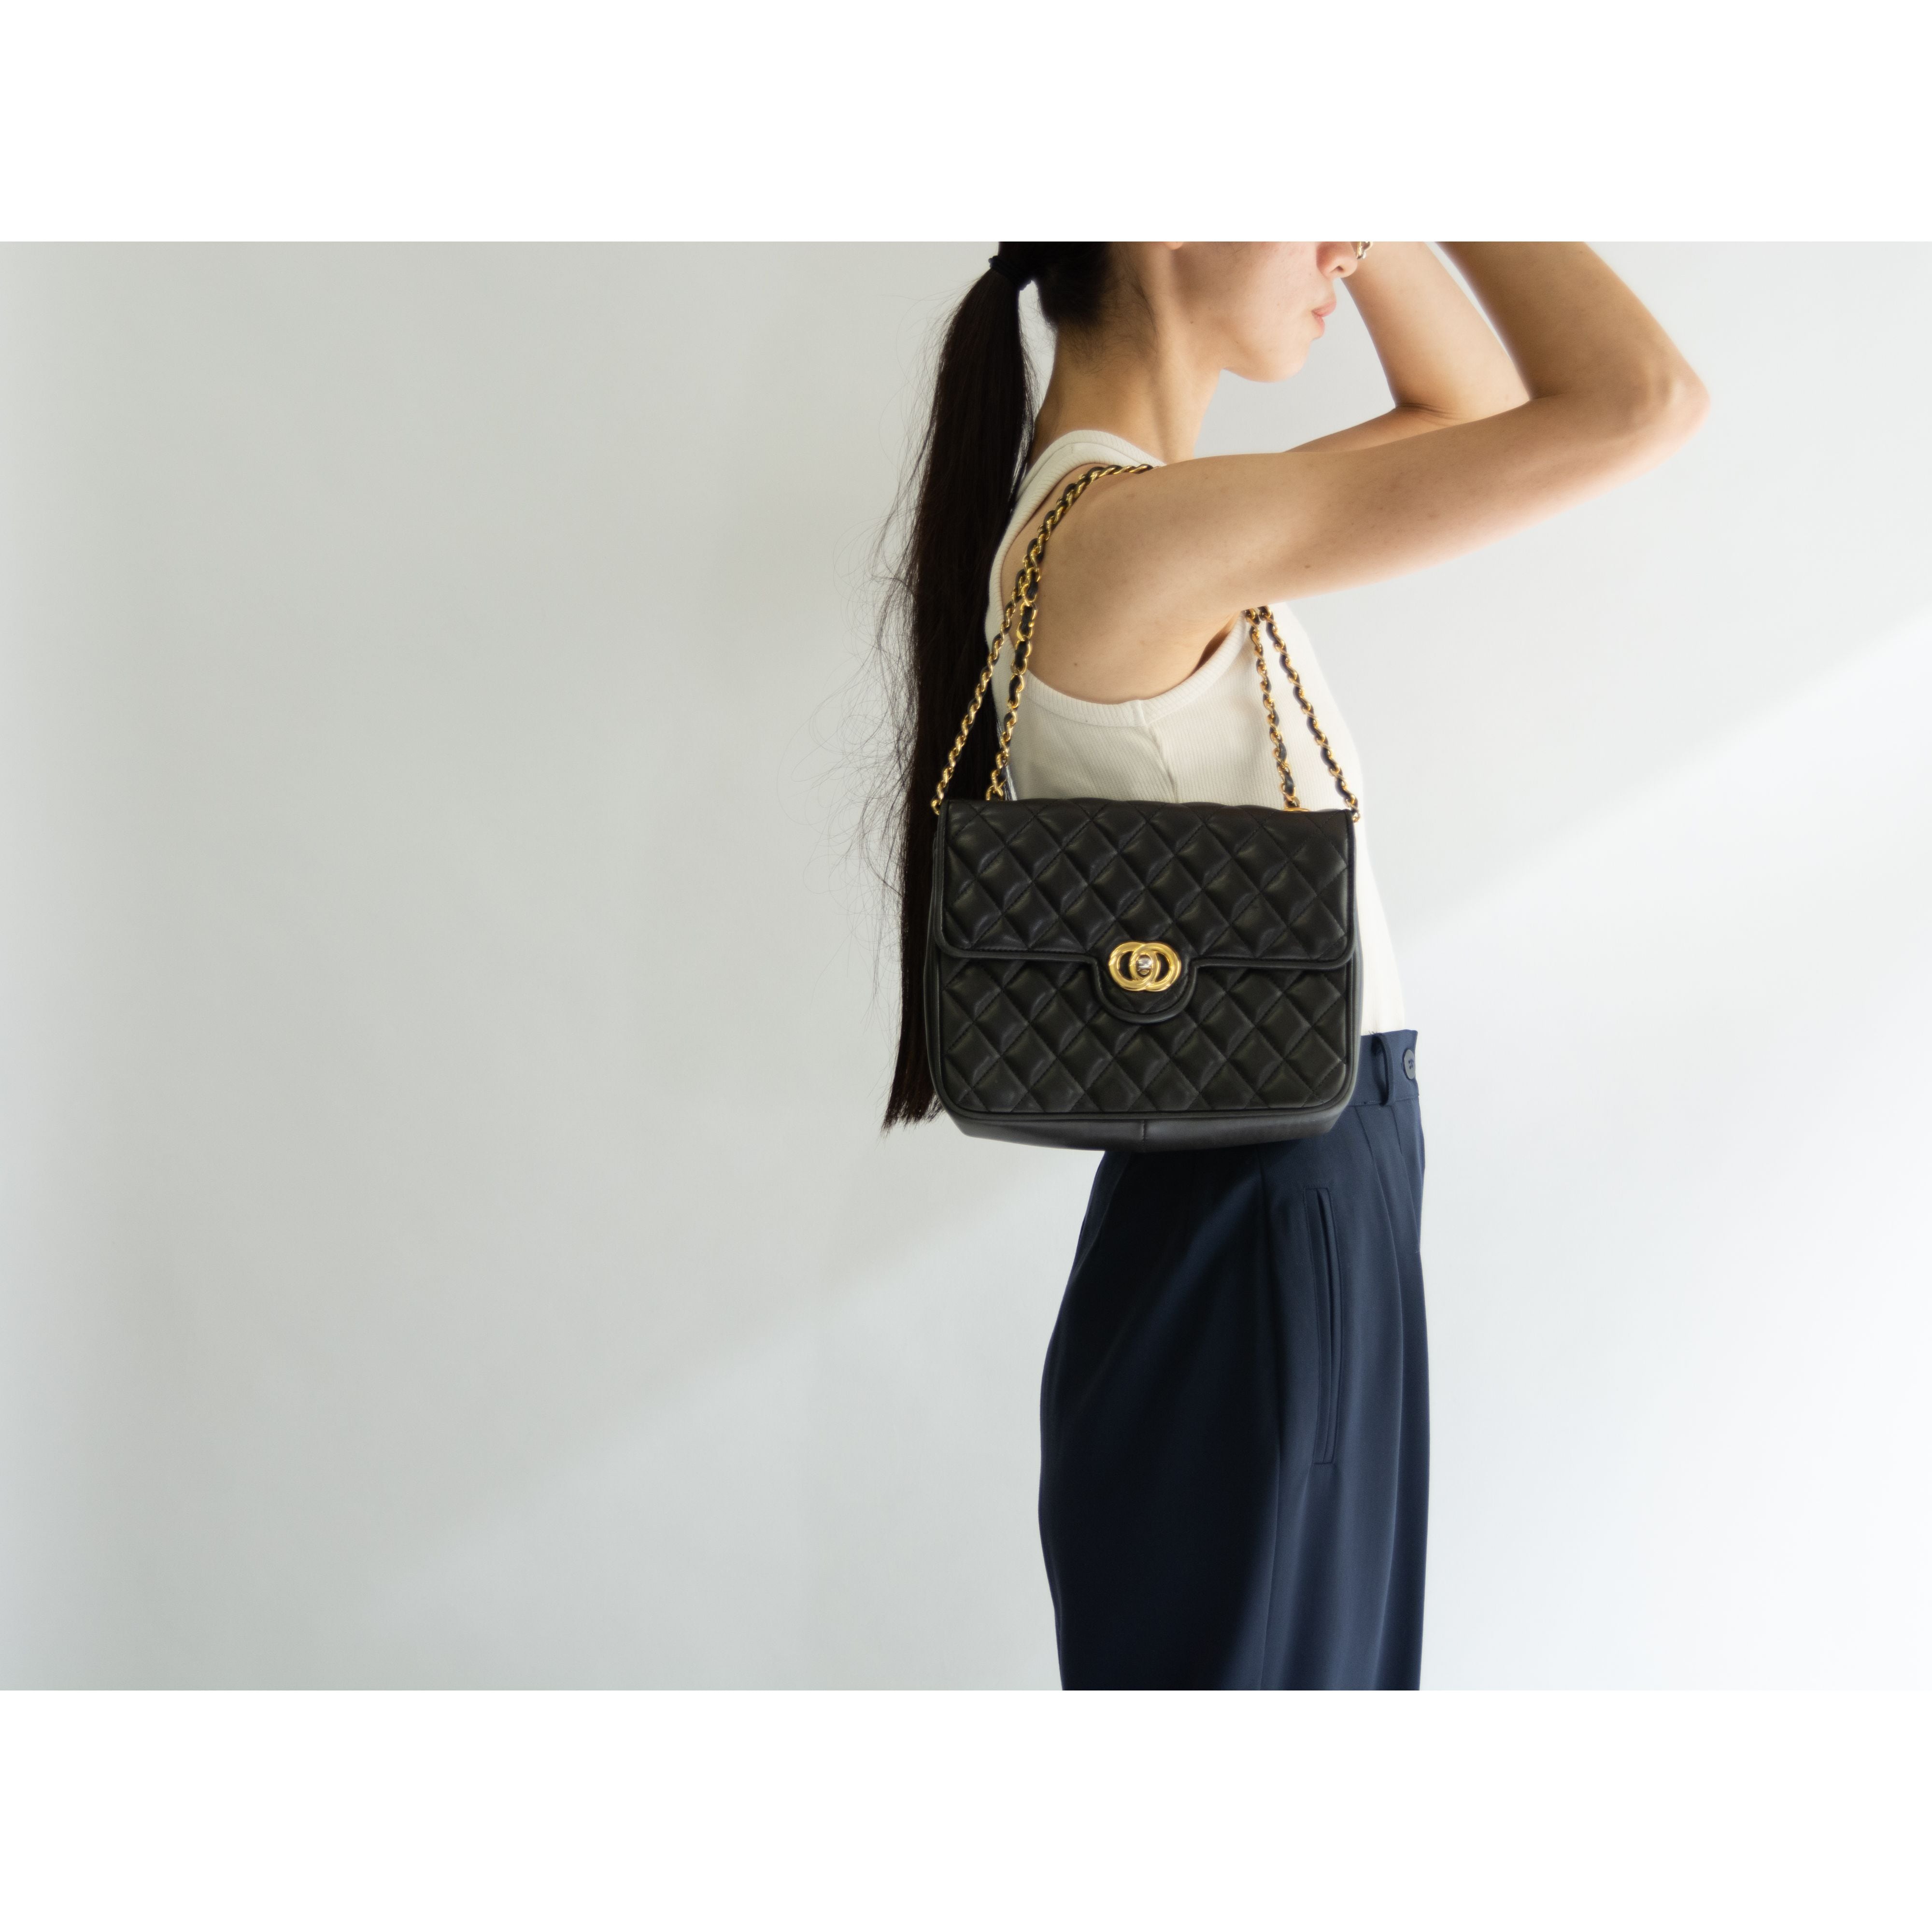 【DOPPIO CC】Made in Italy Leather Chain Shoulder Bag ...